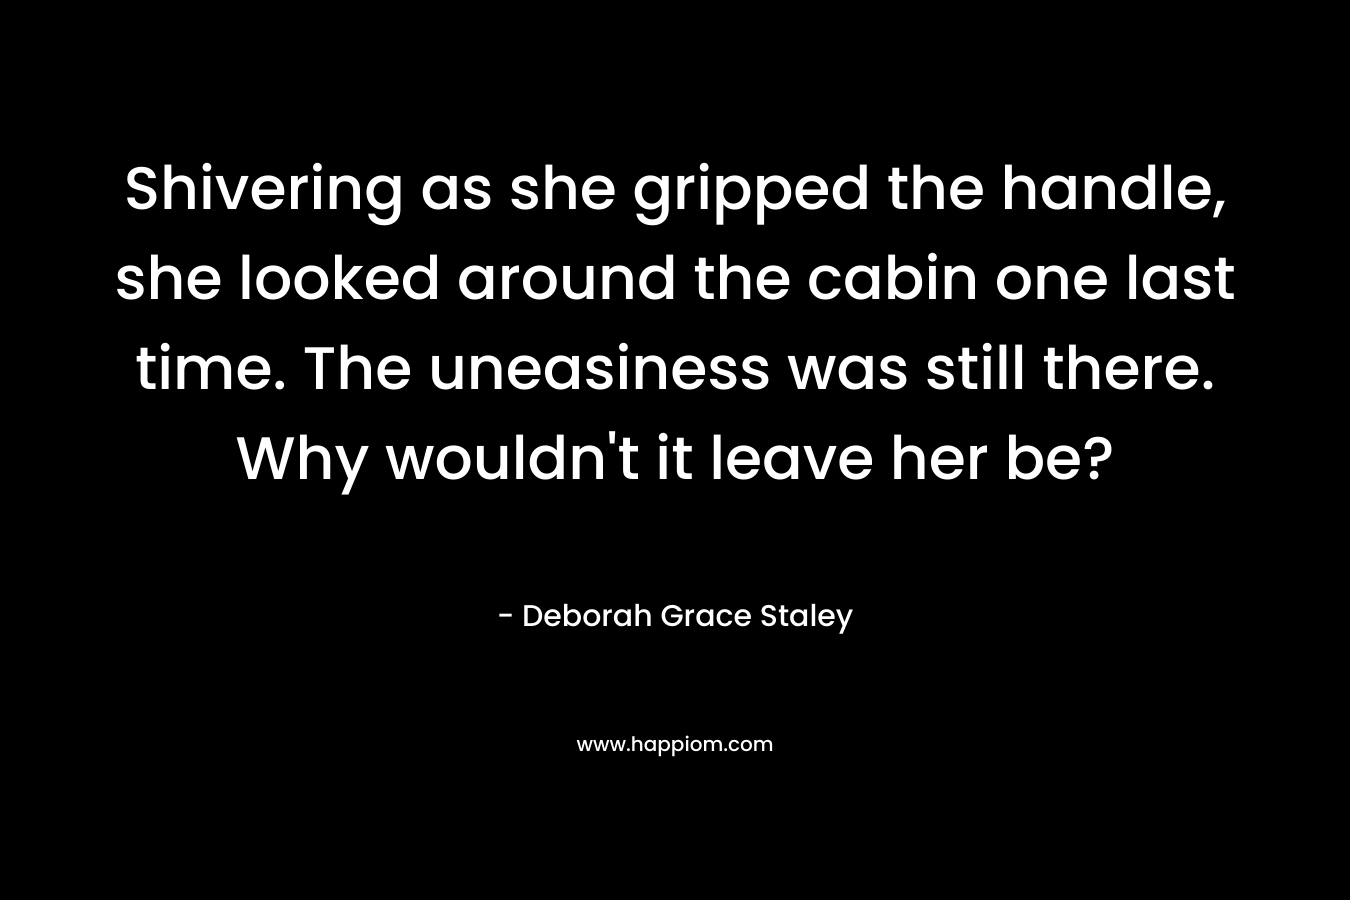 Shivering as she gripped the handle, she looked around the cabin one last time. The uneasiness was still there. Why wouldn’t it leave her be? – Deborah Grace Staley